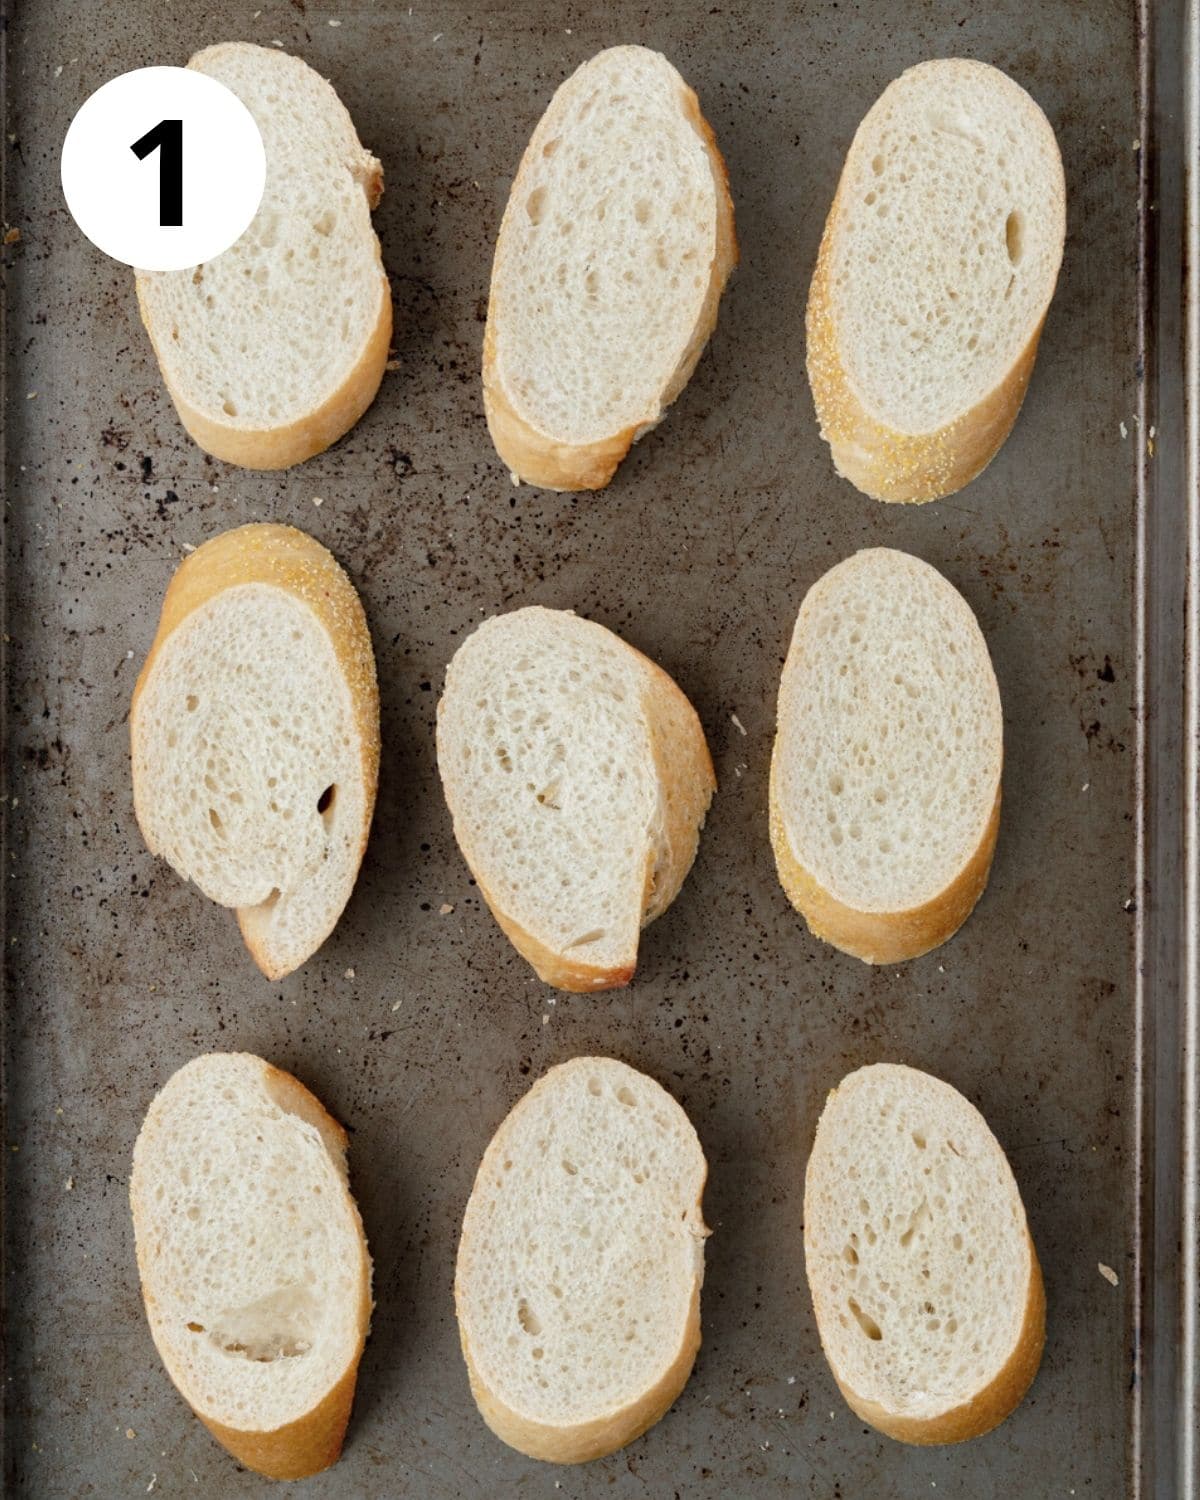 slices of bread on baking sheet